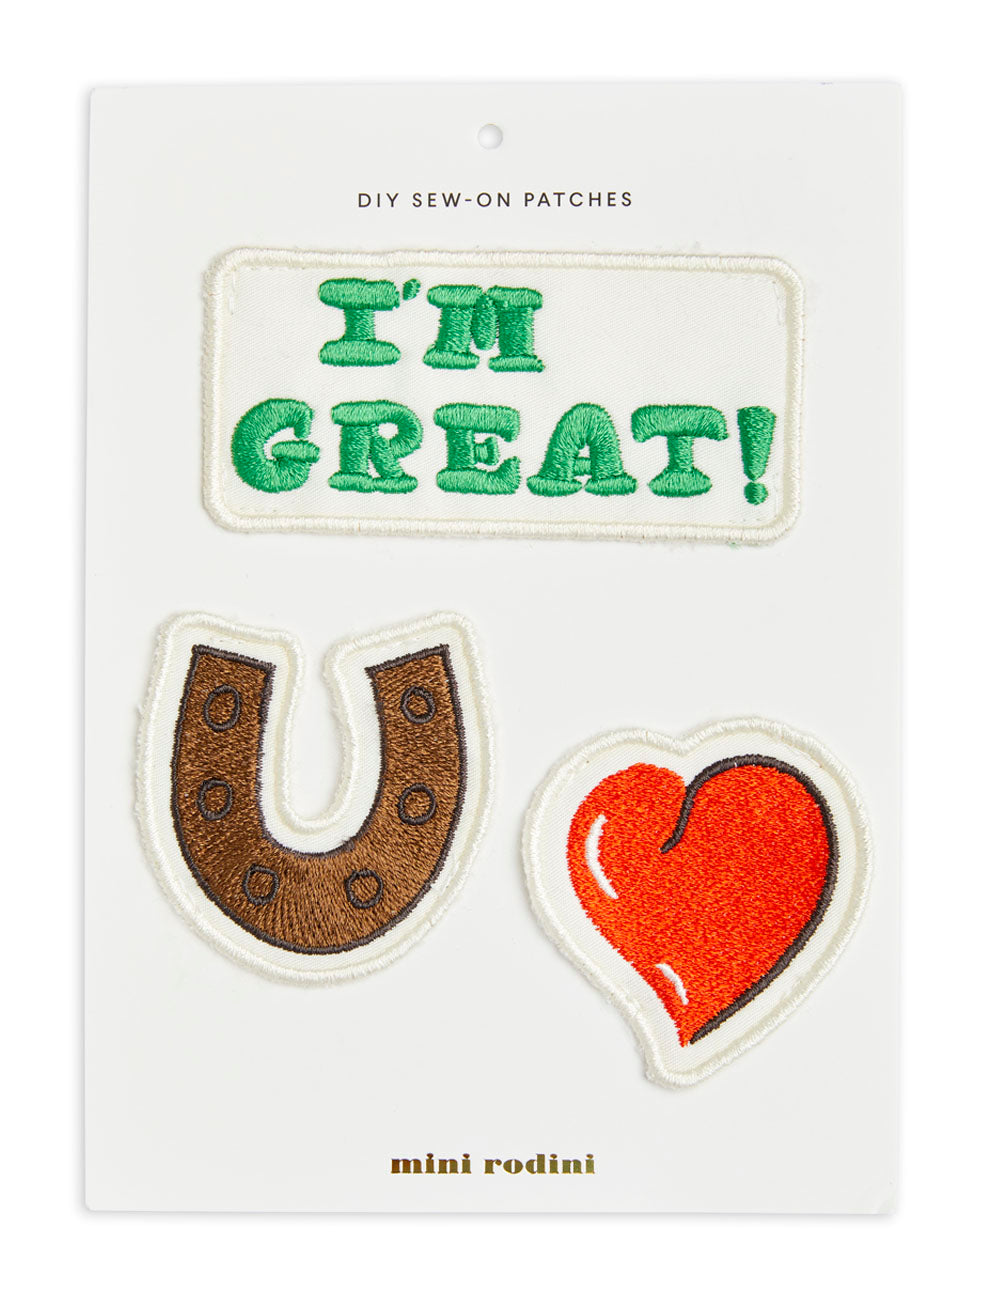 Diy-Sew-On-Patches-100321974MLT-Image-1